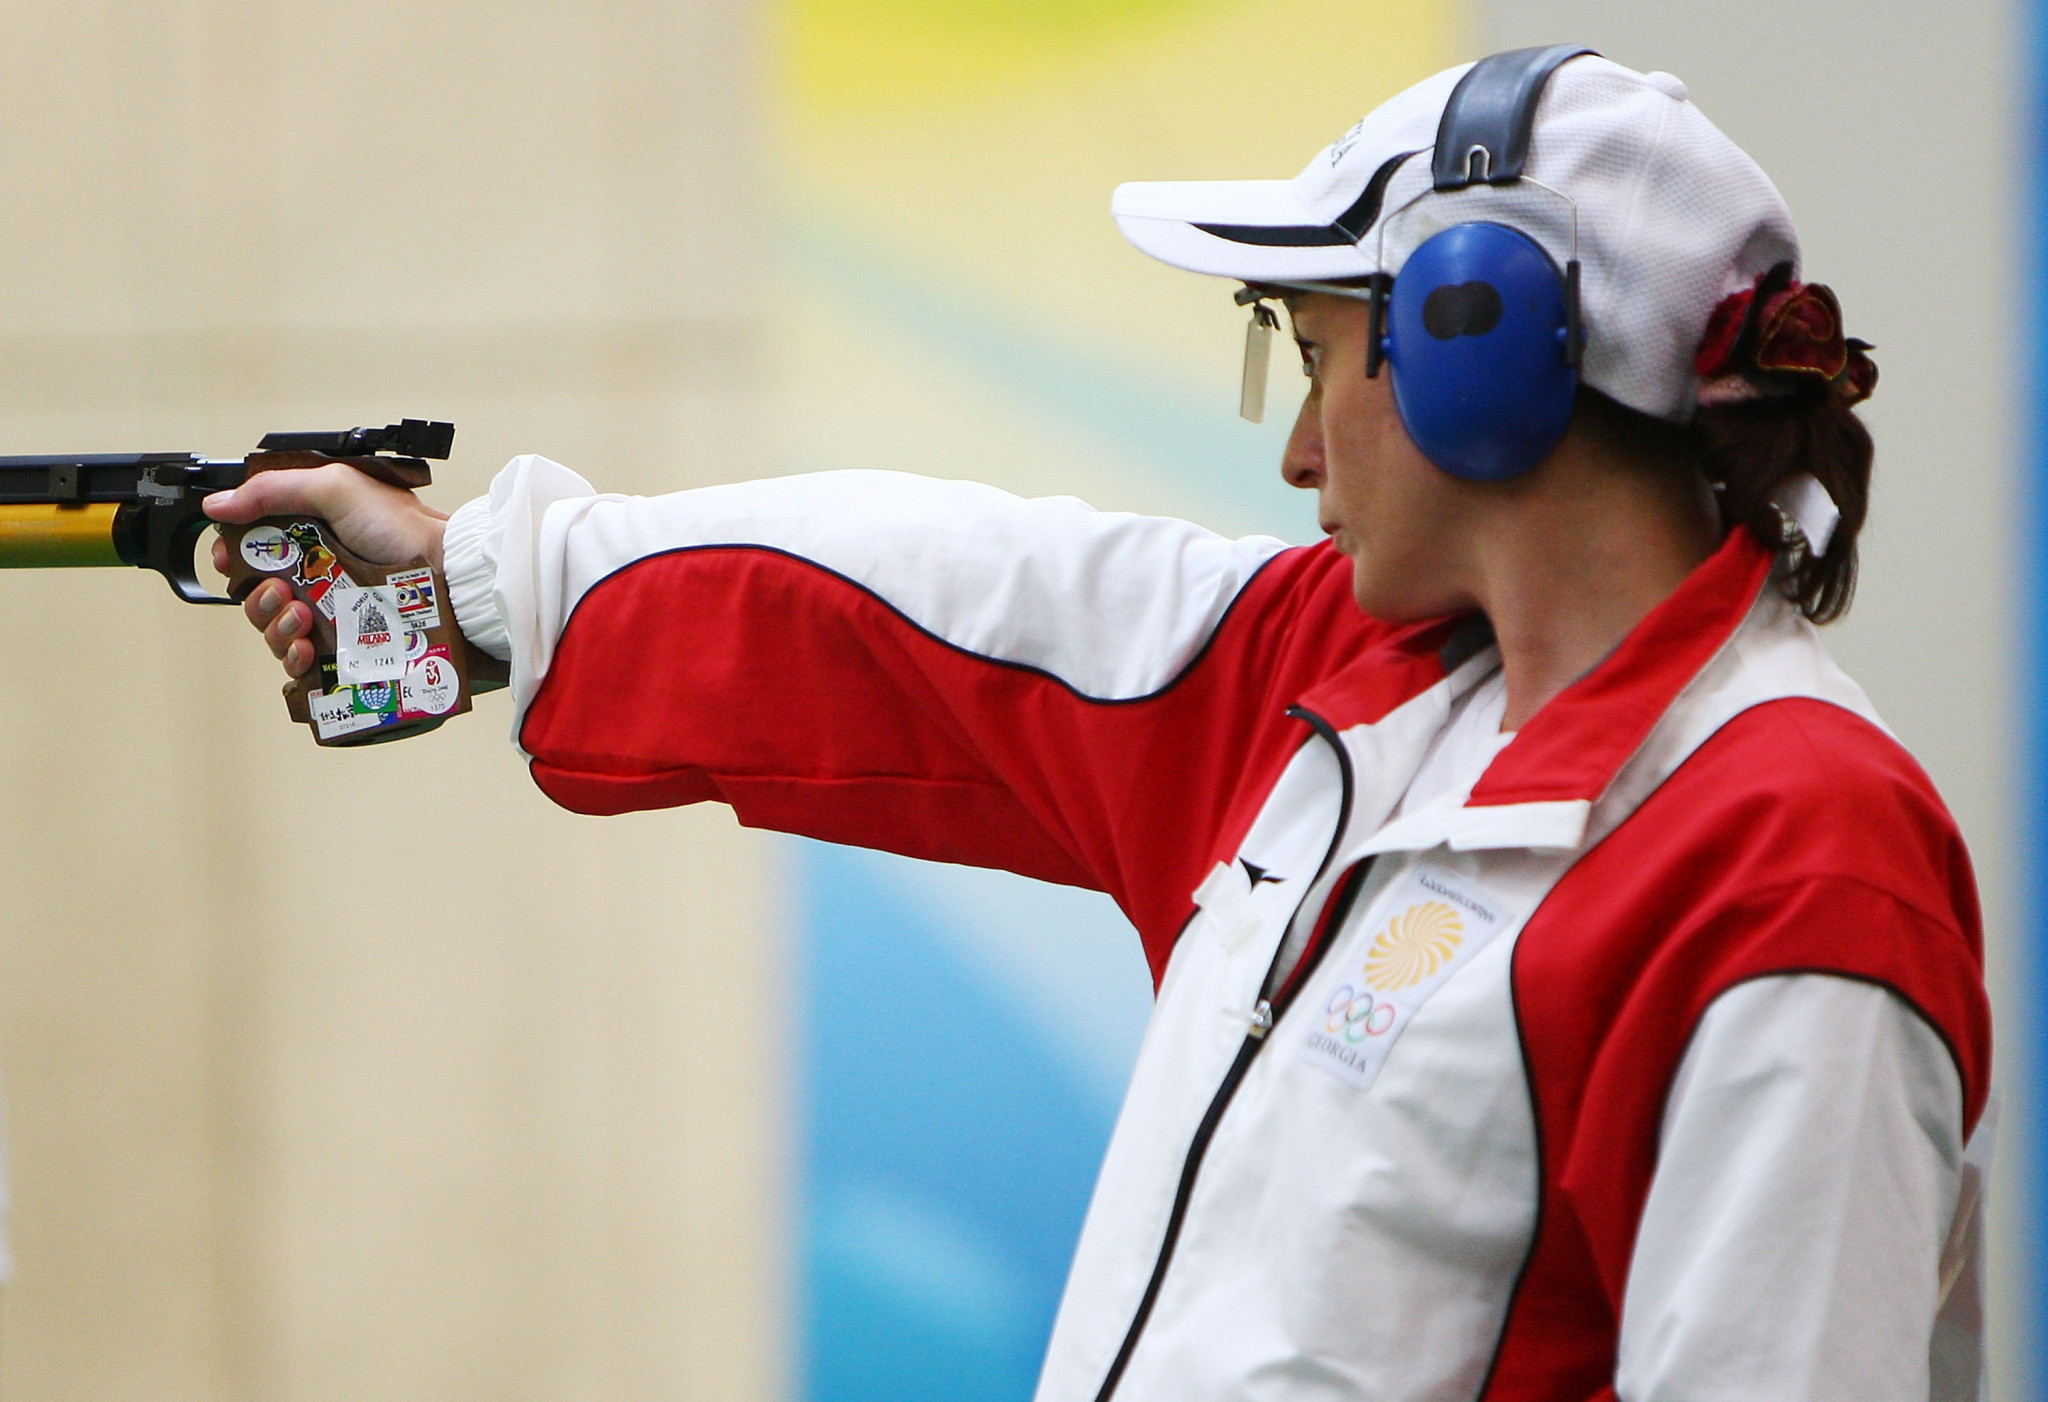 Former Olympic pistol shooting champion Nino Salukvadze is now a vice president of the Georgian National Olympic Committee and helped present the diplomas ©Getty Images